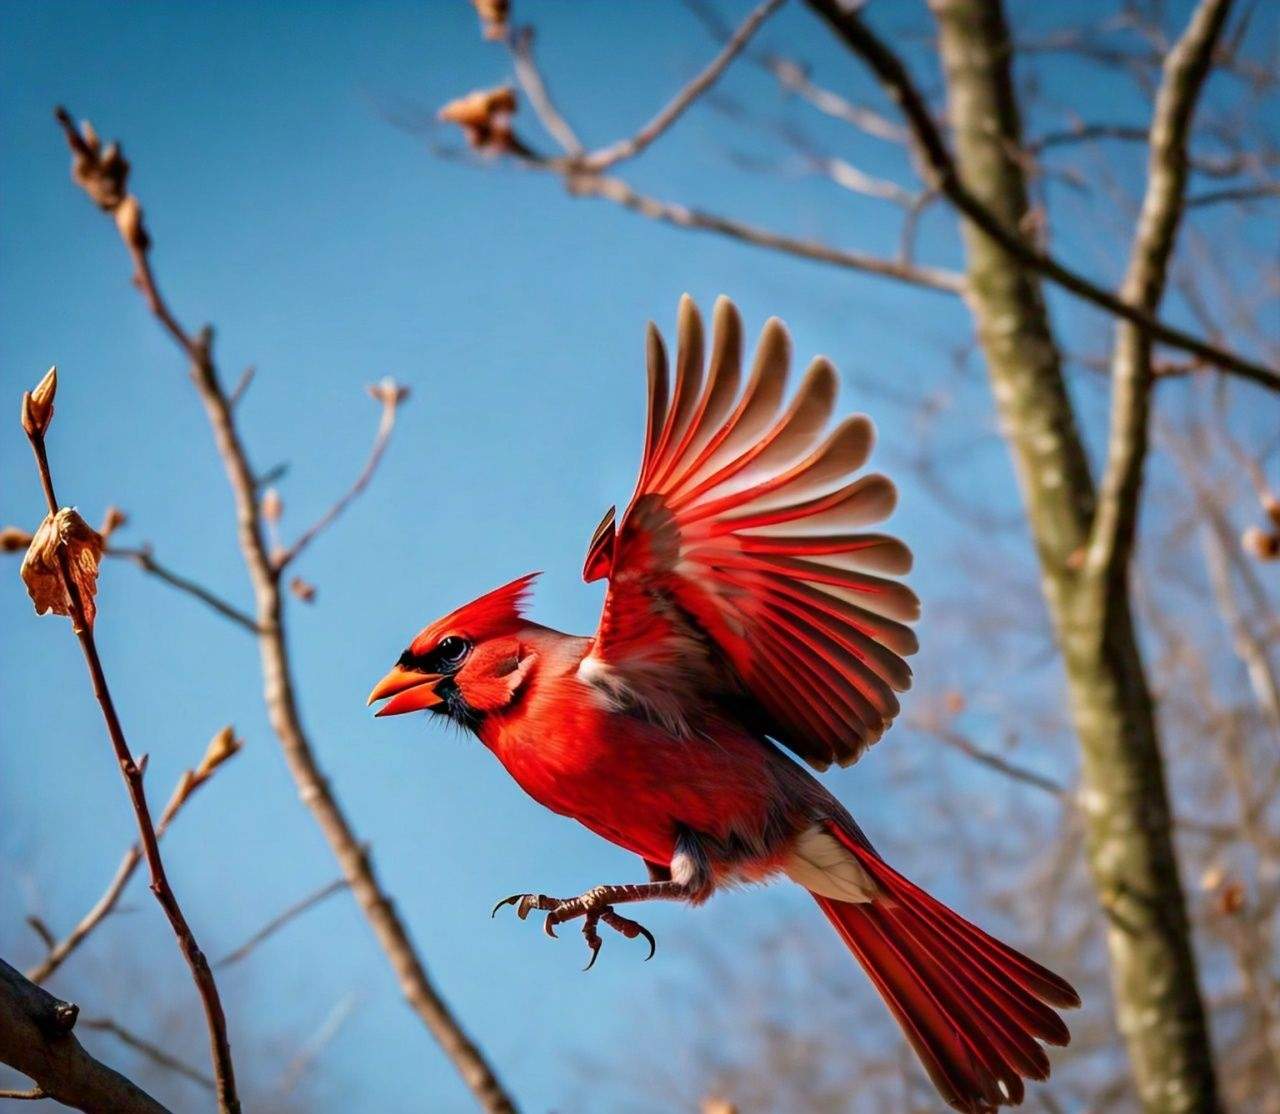 The Vibrant Red Cardinal: A Symbol of Beauty and Joy